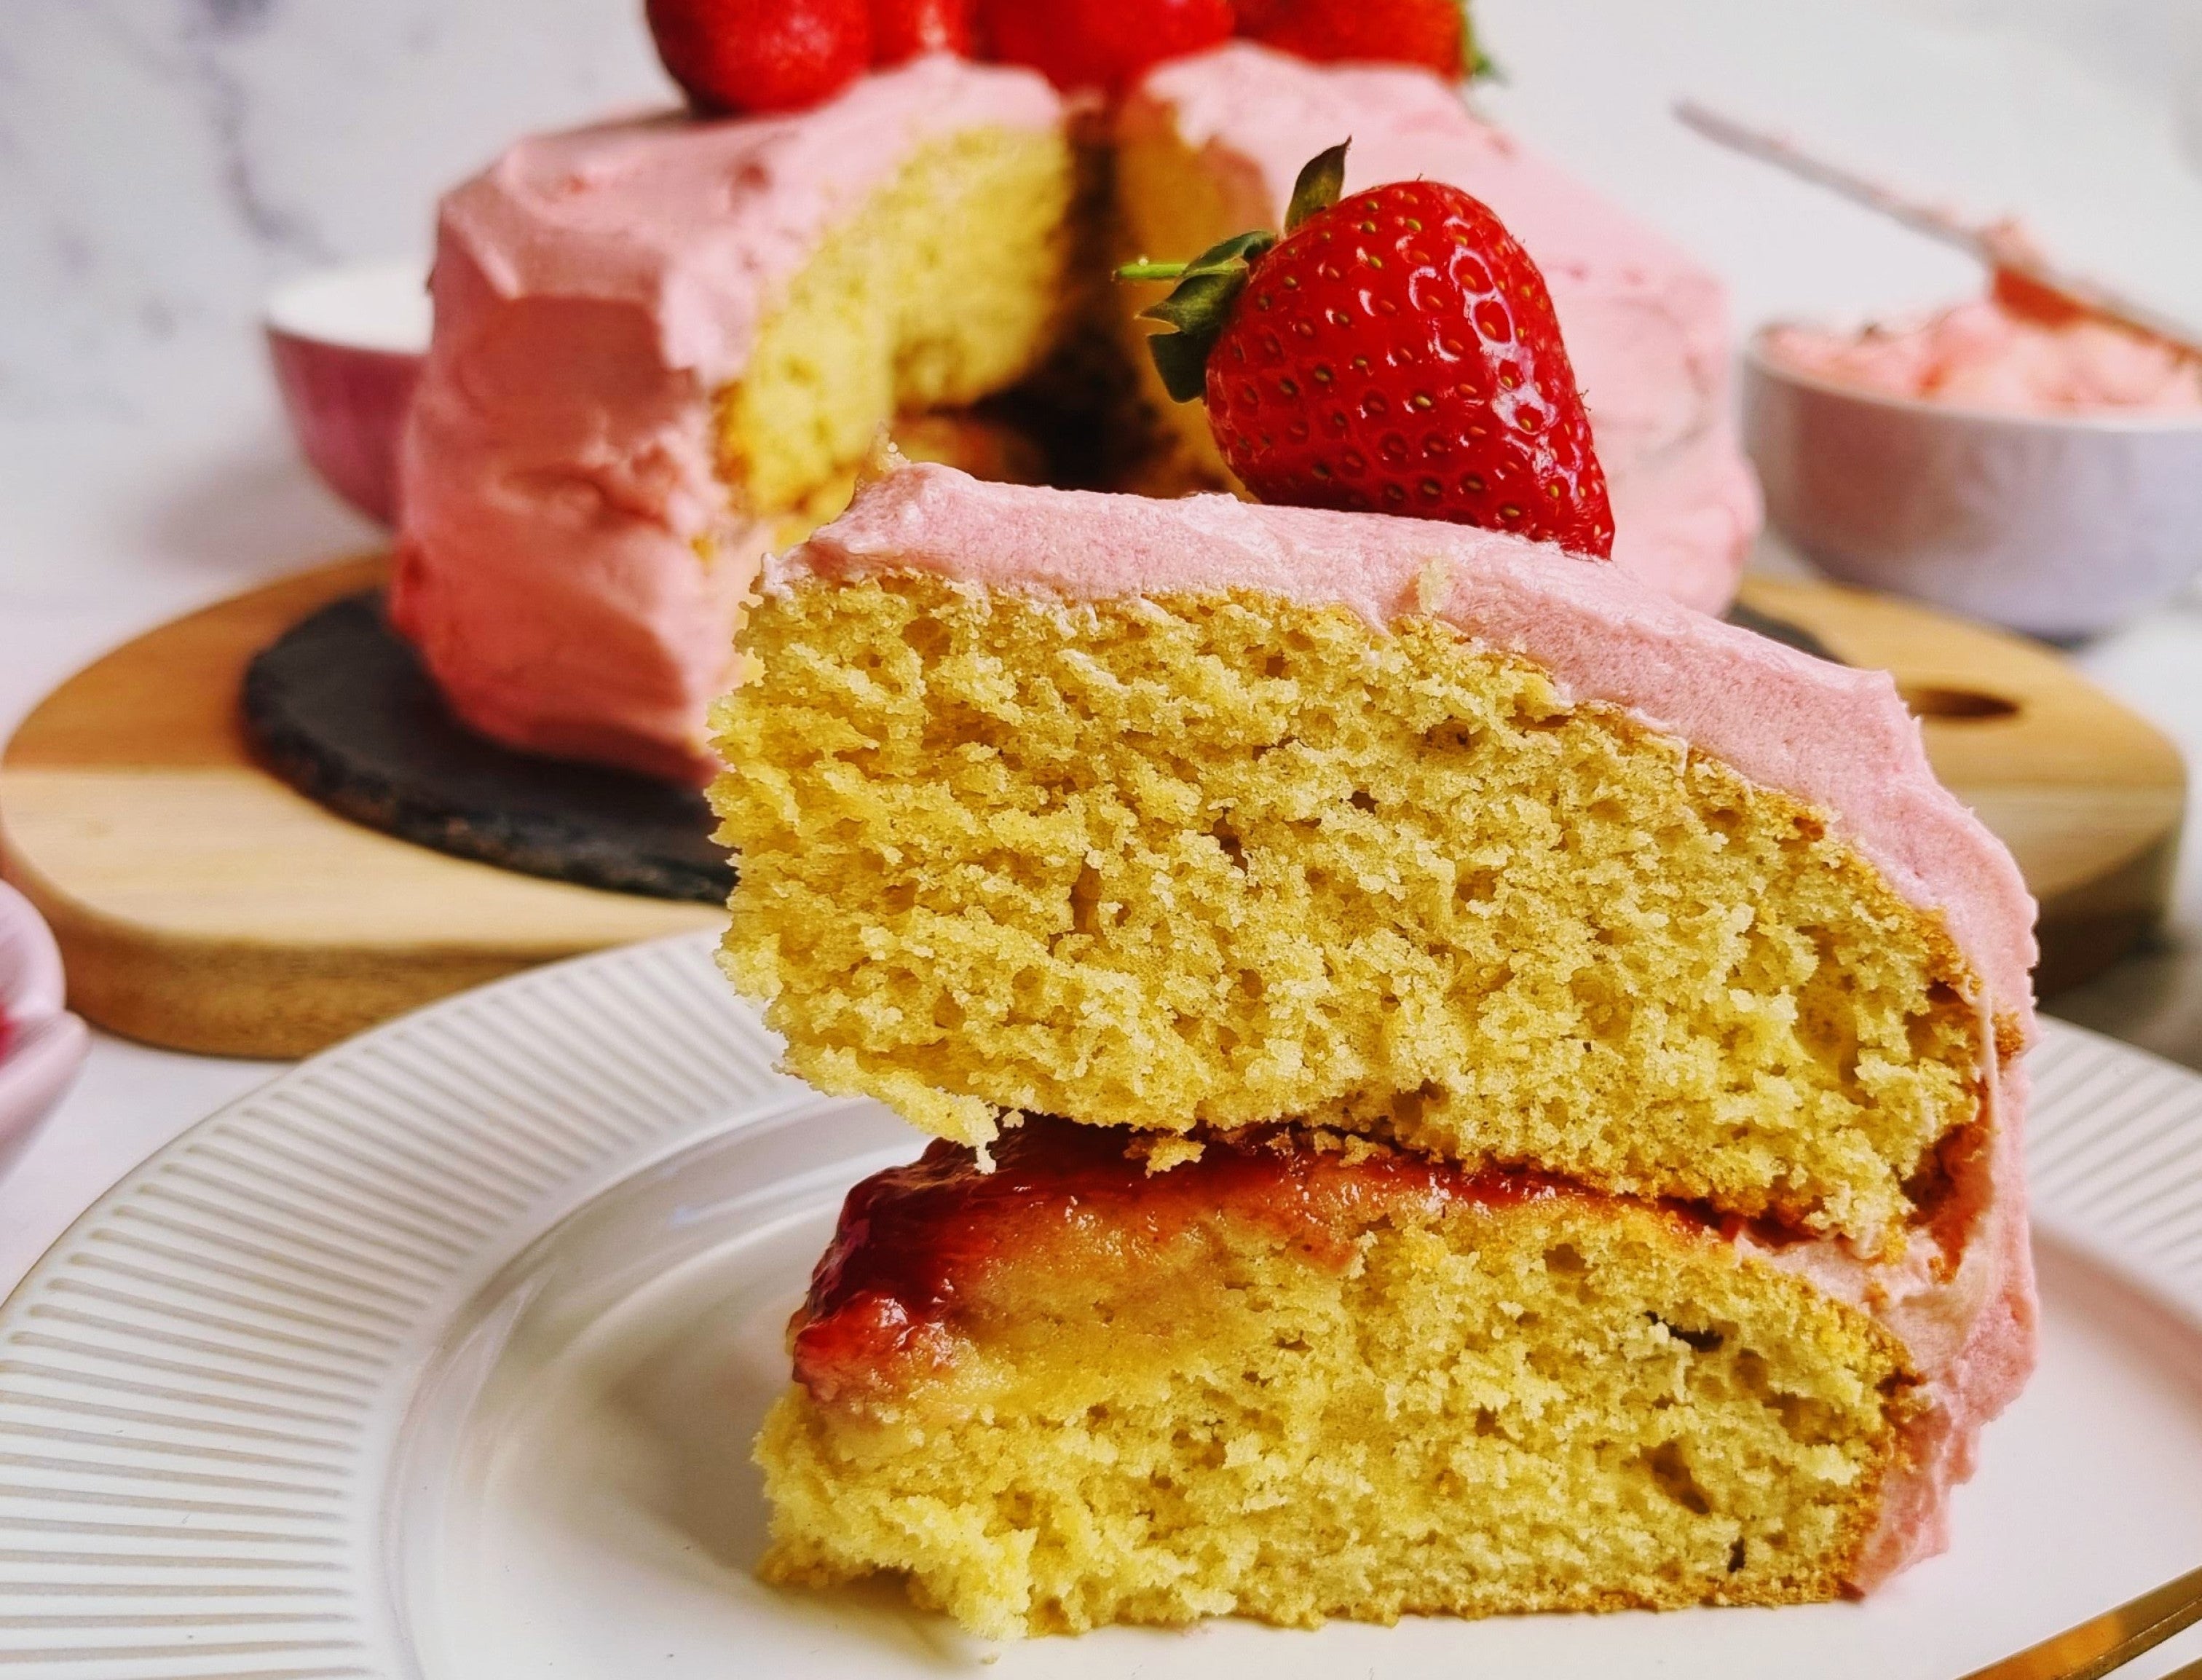 Slice of homemade strawberry cake with a jam filling and strawberry buttercream icing 